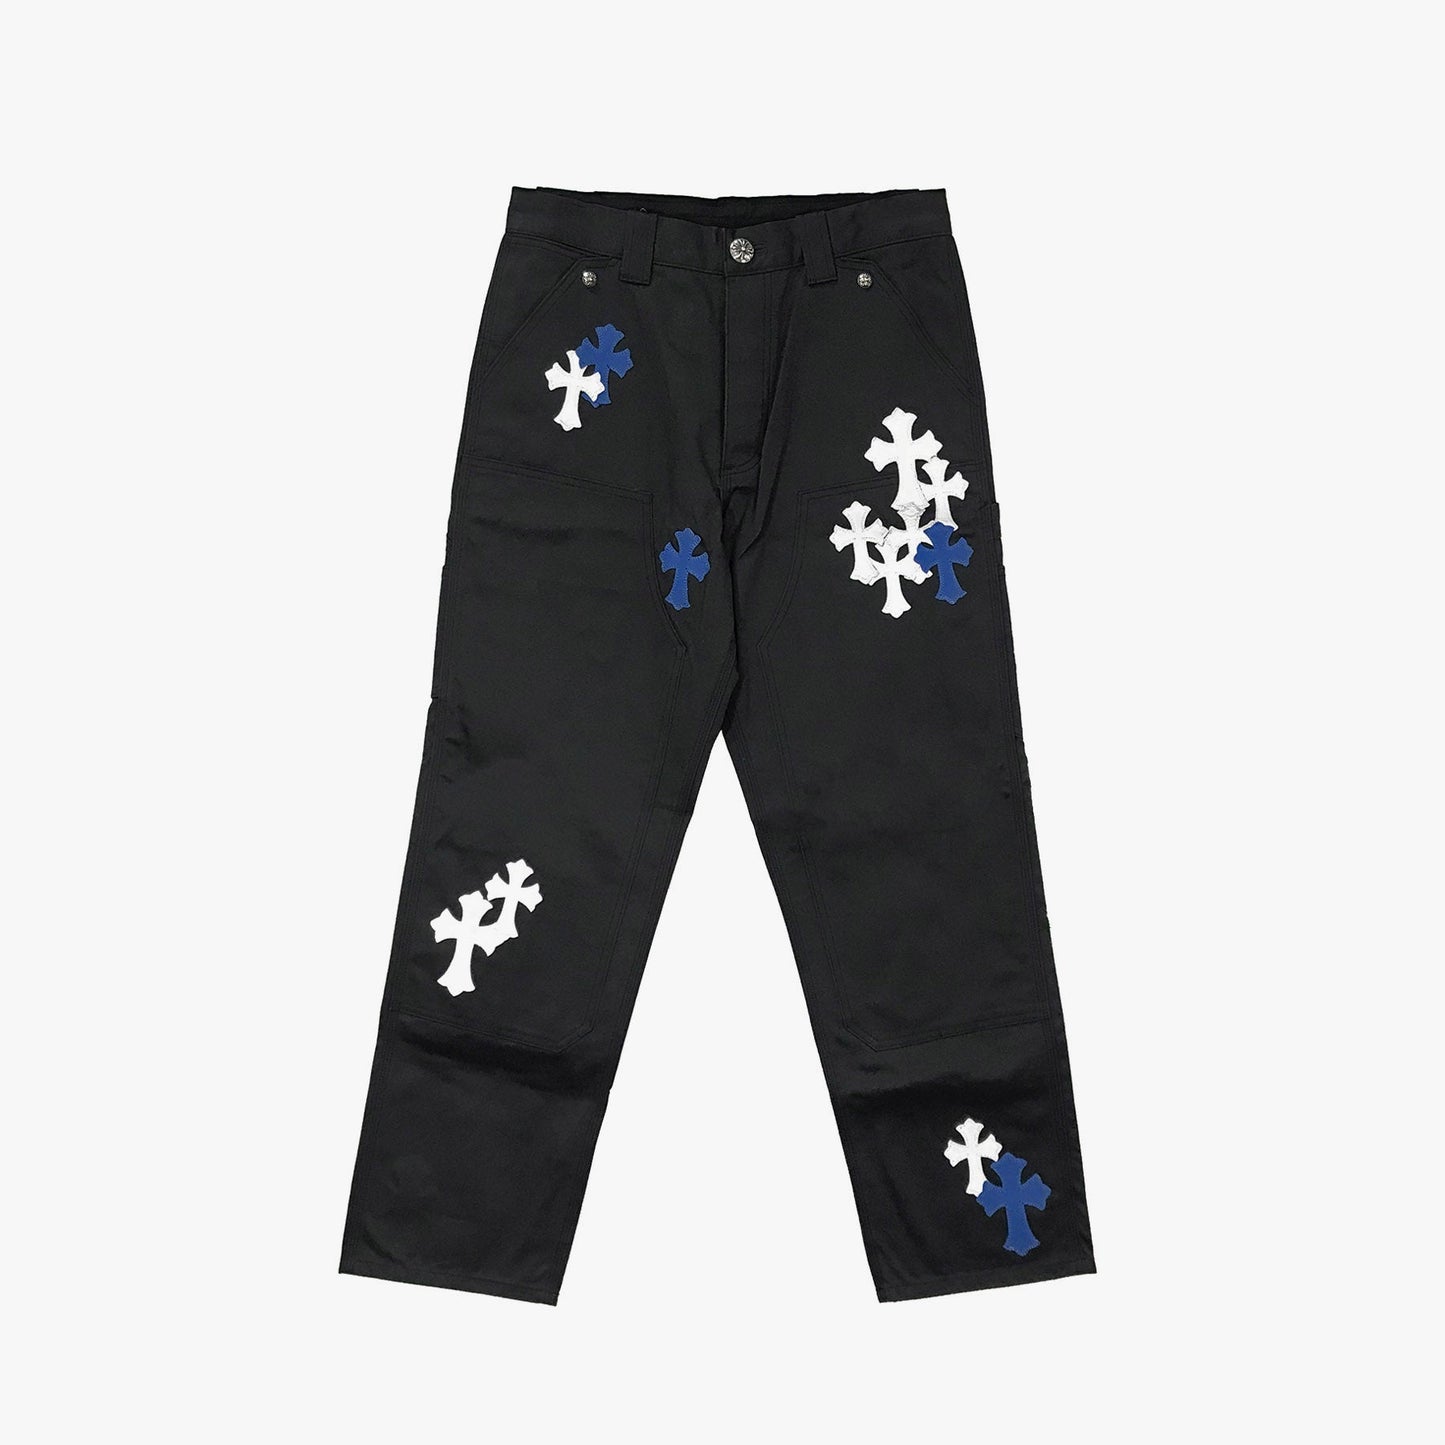 Chrome Hearts White & Blue Leather Cross Patches Jeans - SHENGLI ROAD MARKET